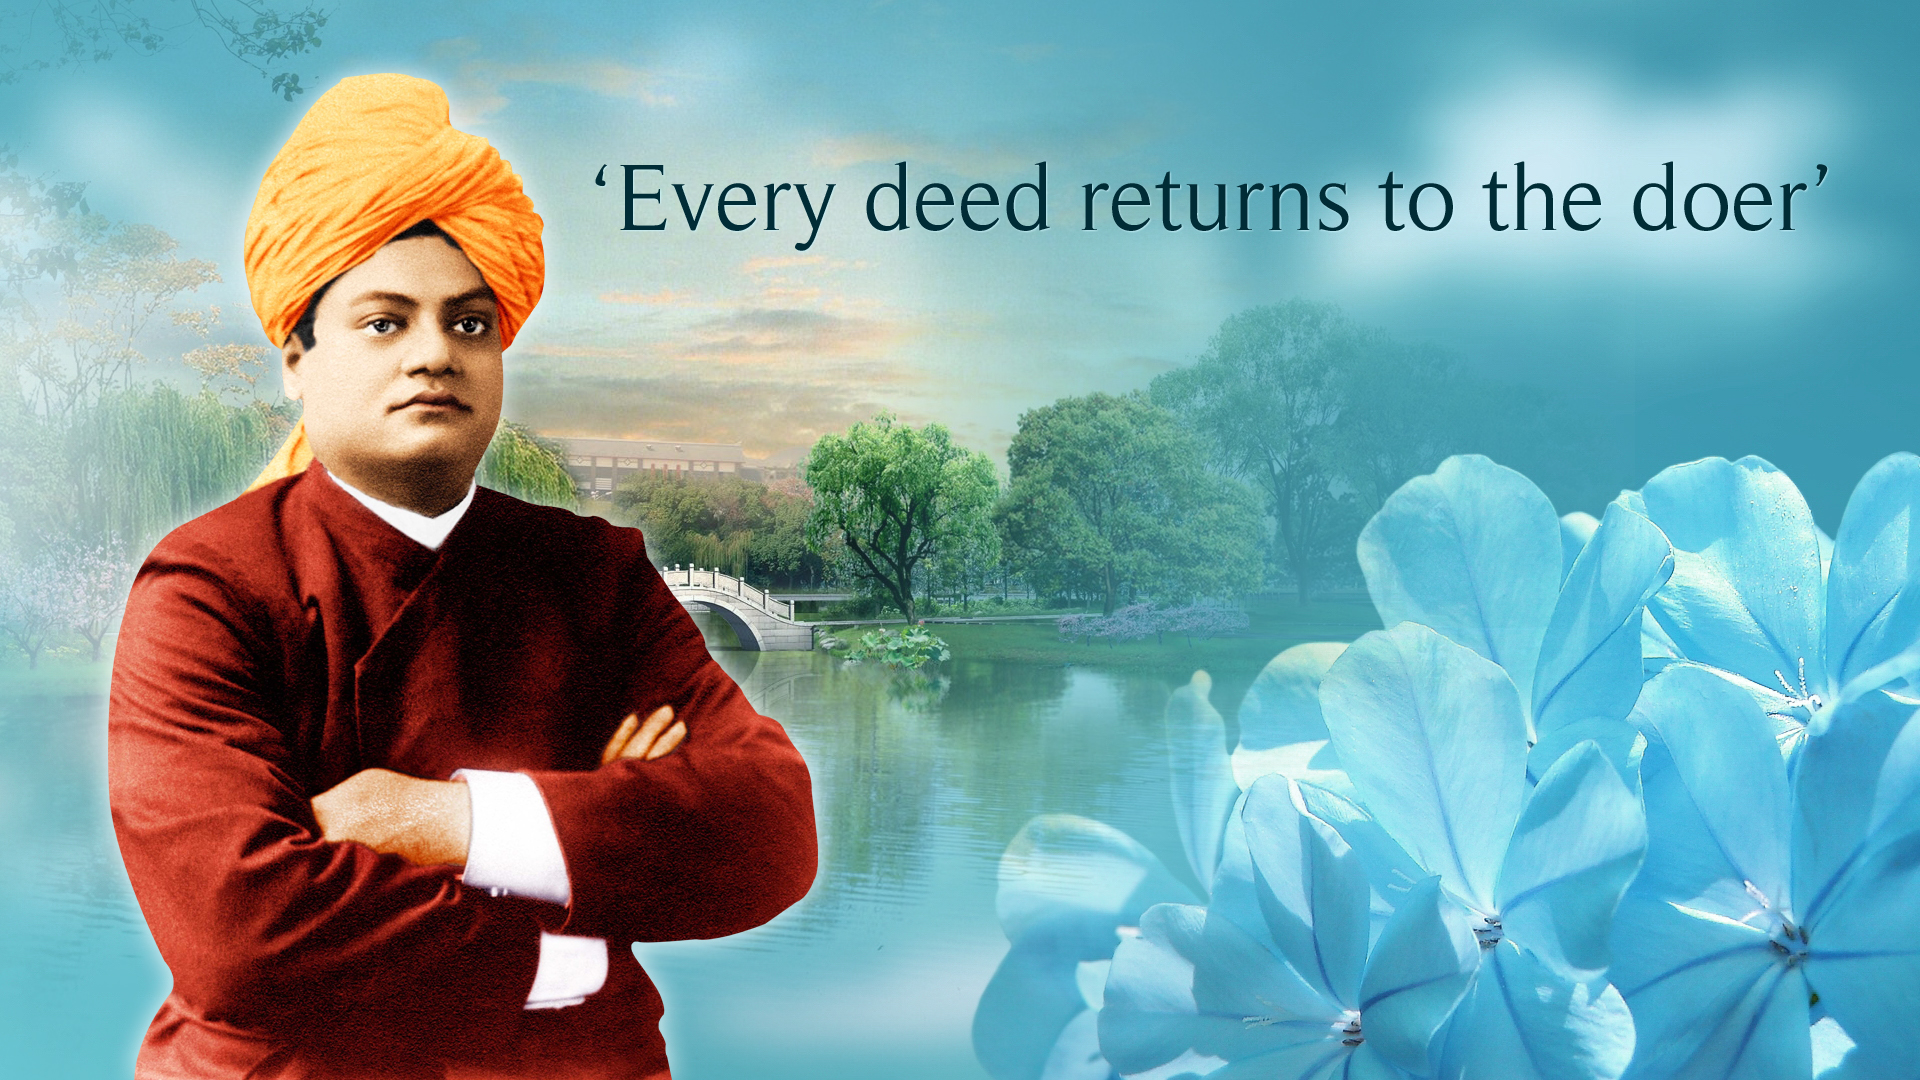 Download Swami Vivekananda Images Photos Wallpapers Full HD For Facebook DP  and Whatsap  Swami vivekananda Swami vivekananda wallpapers Swami  vivekananda quotes